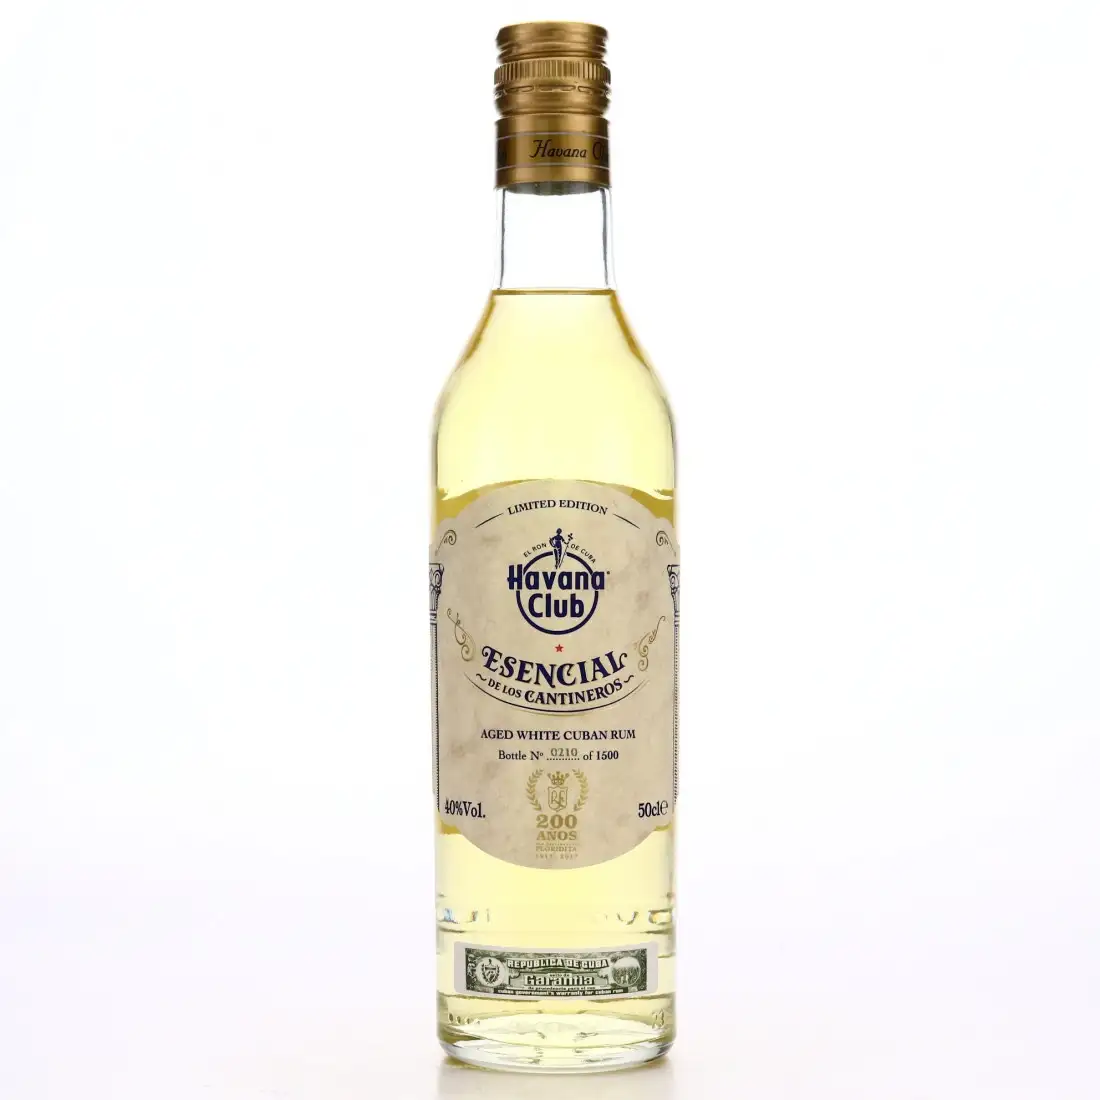 Image of the front of the bottle of the rum Esencial De Los Cantineros